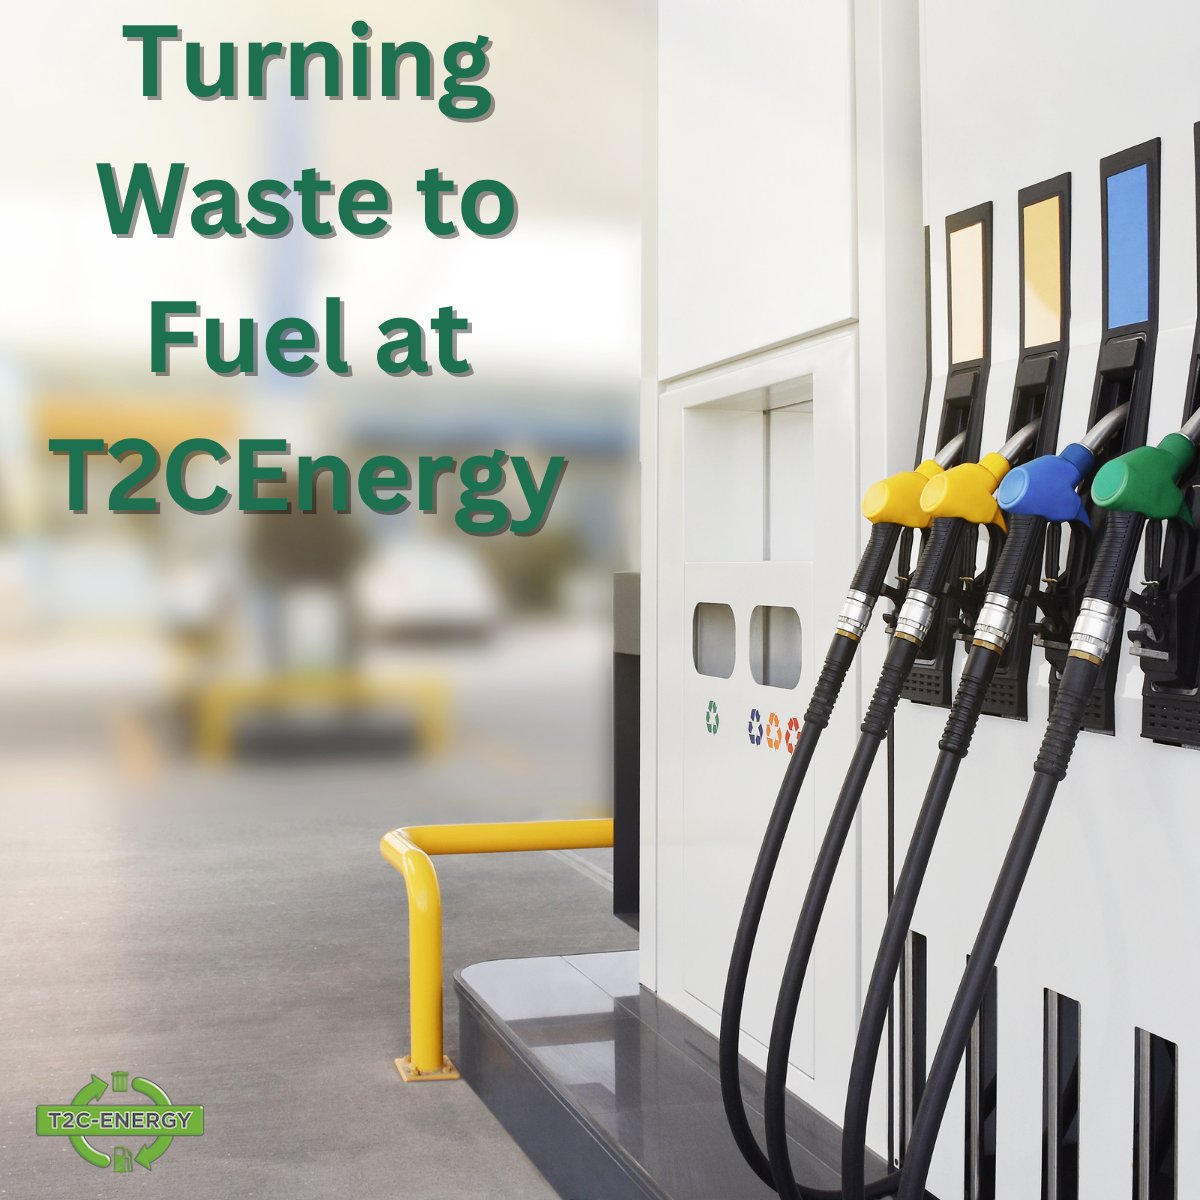 We are writing a new chapter in green energy.

Converting waste to fuel that can be used in cars and trucks.

This is the game changer the country needs.

#usa #greenenergy #wastetofuel #environment #alternativeenergy